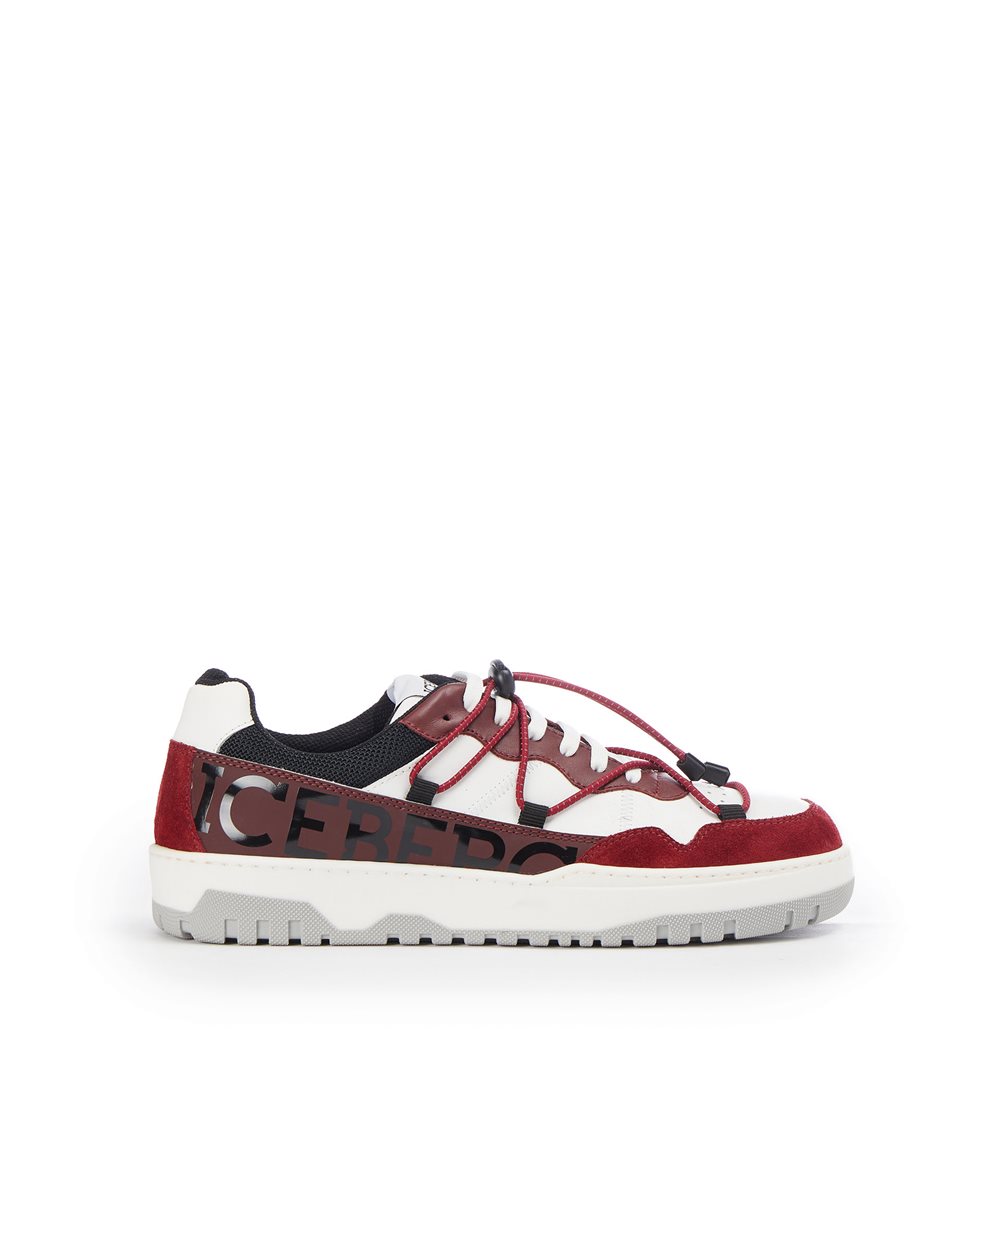 Nabuk and leather Okoro sneakers - ( PRIMO STEP US ) PROMO SALDI UP TO 30%  | Iceberg - Official Website